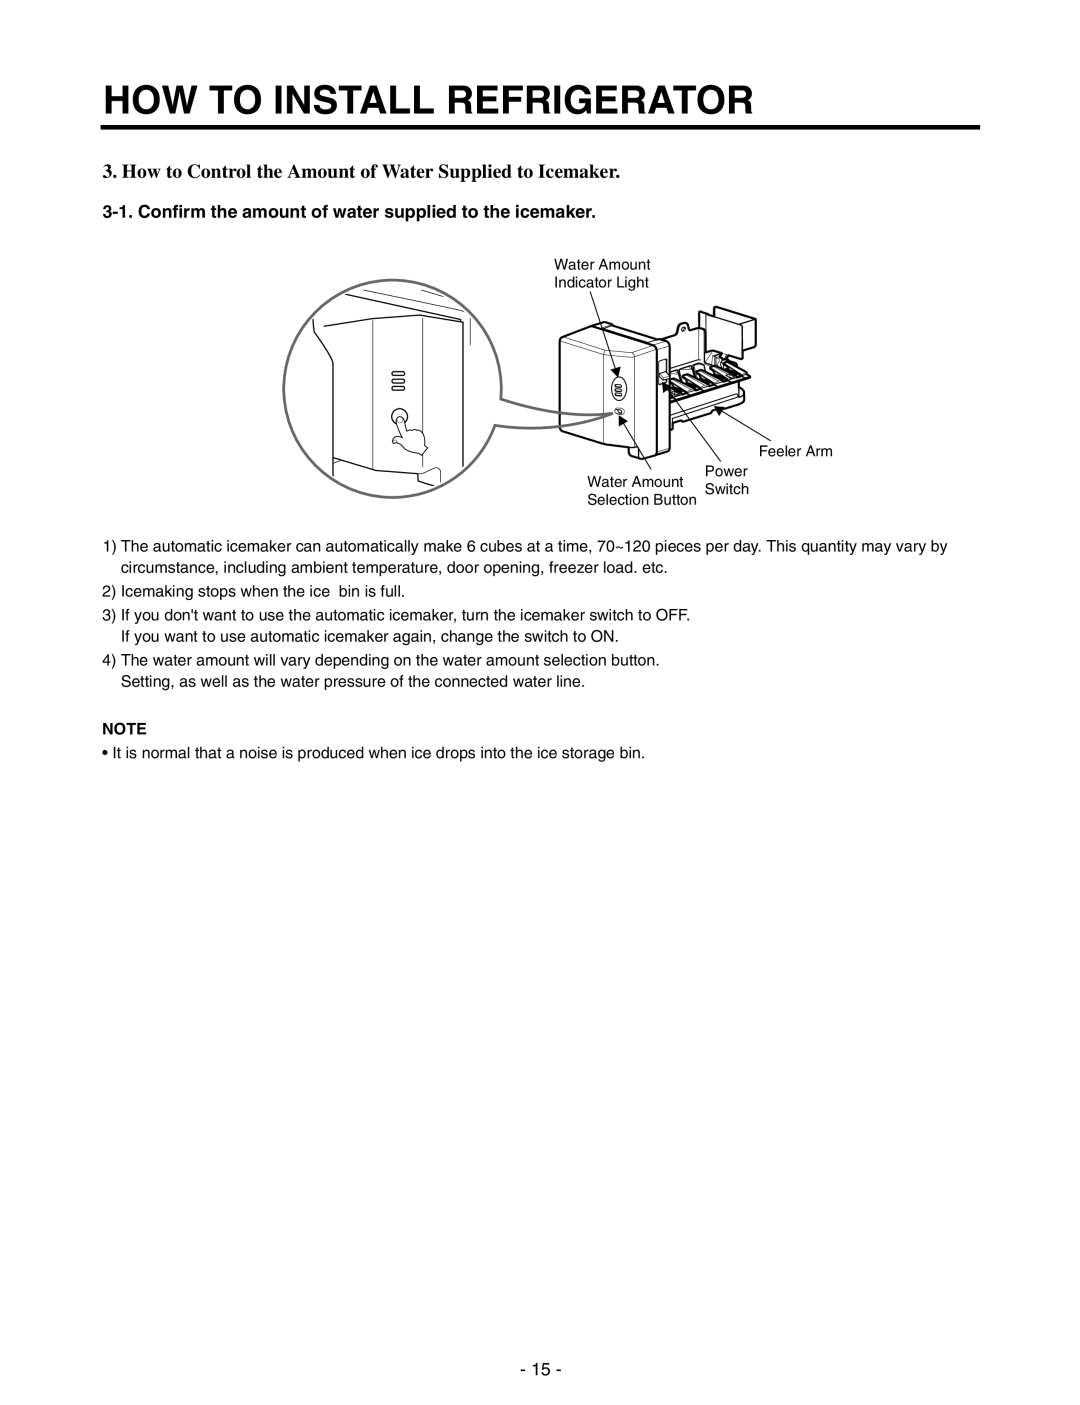 LG Electronics GR-P257/L257 How to Control the Amount of Water Supplied to Icemaker, How To Install Refrigerator 